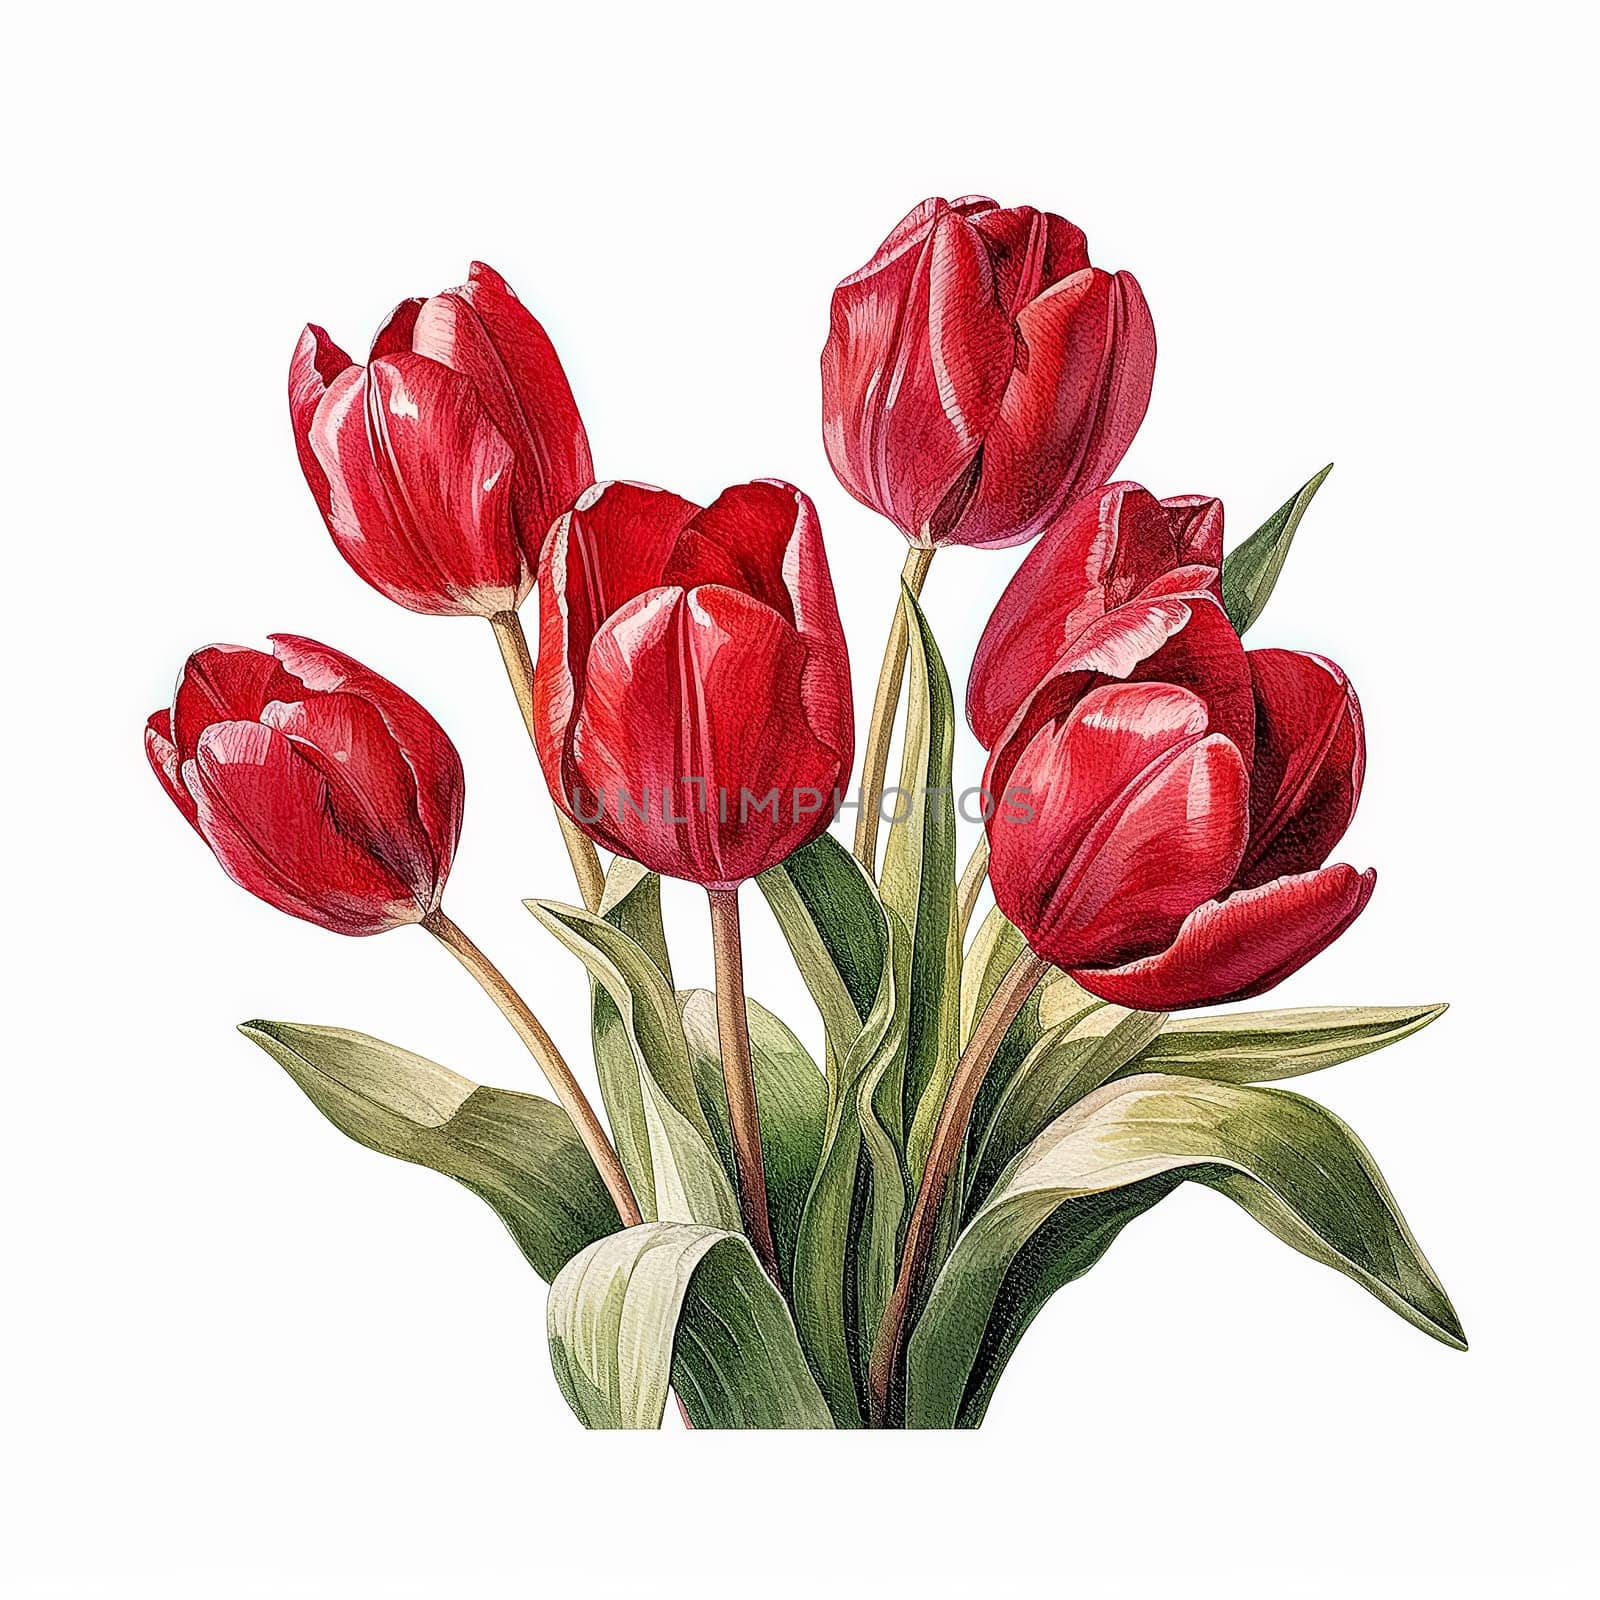 A bouquet of red tulips with green leaves. by Alla_Morozova93